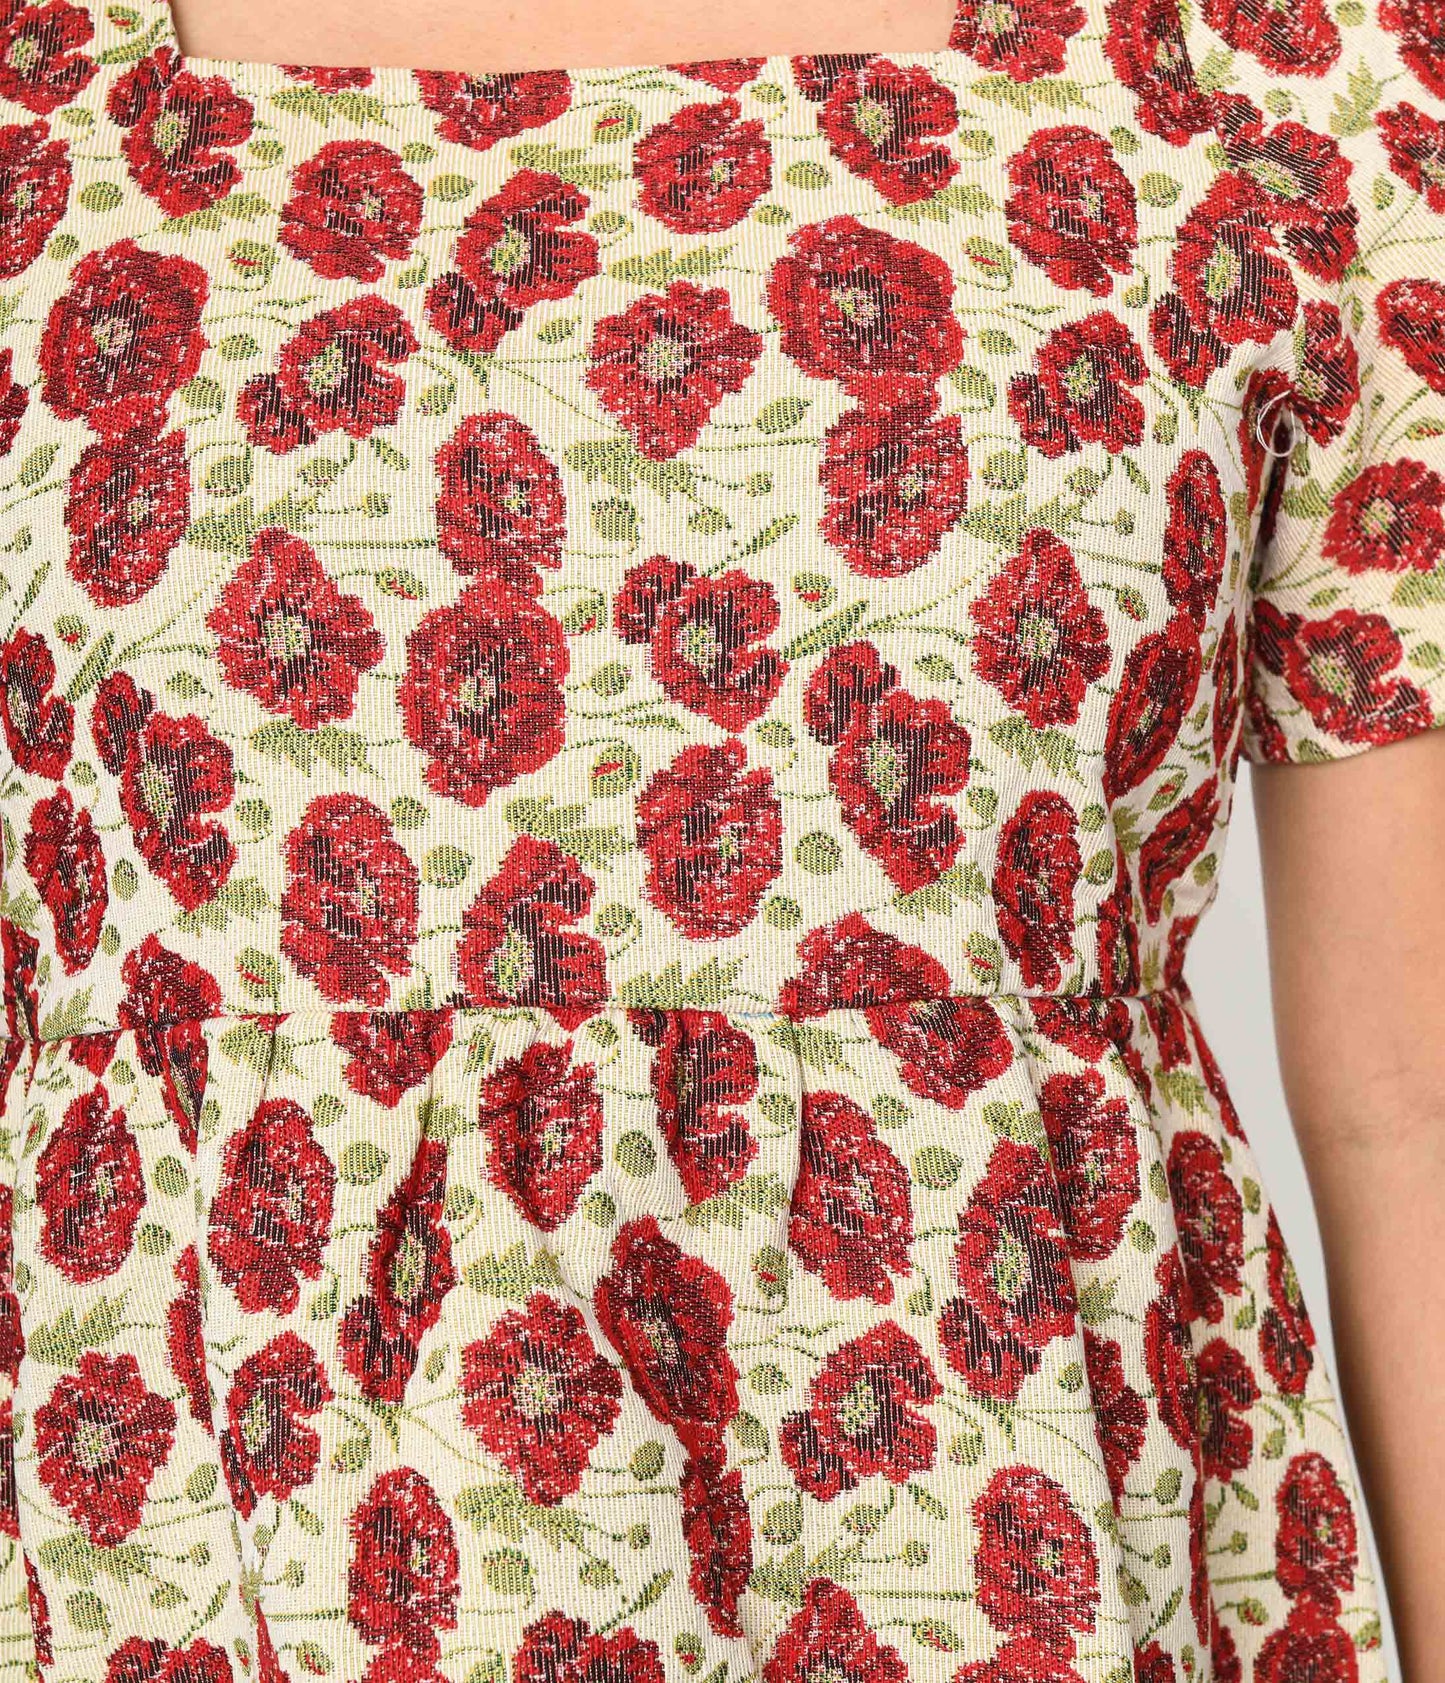 Ivory & Red Floral Kiss Jacquard Peplum Top - Unique Vintage - Womens, TOPS, WOVEN TOPS